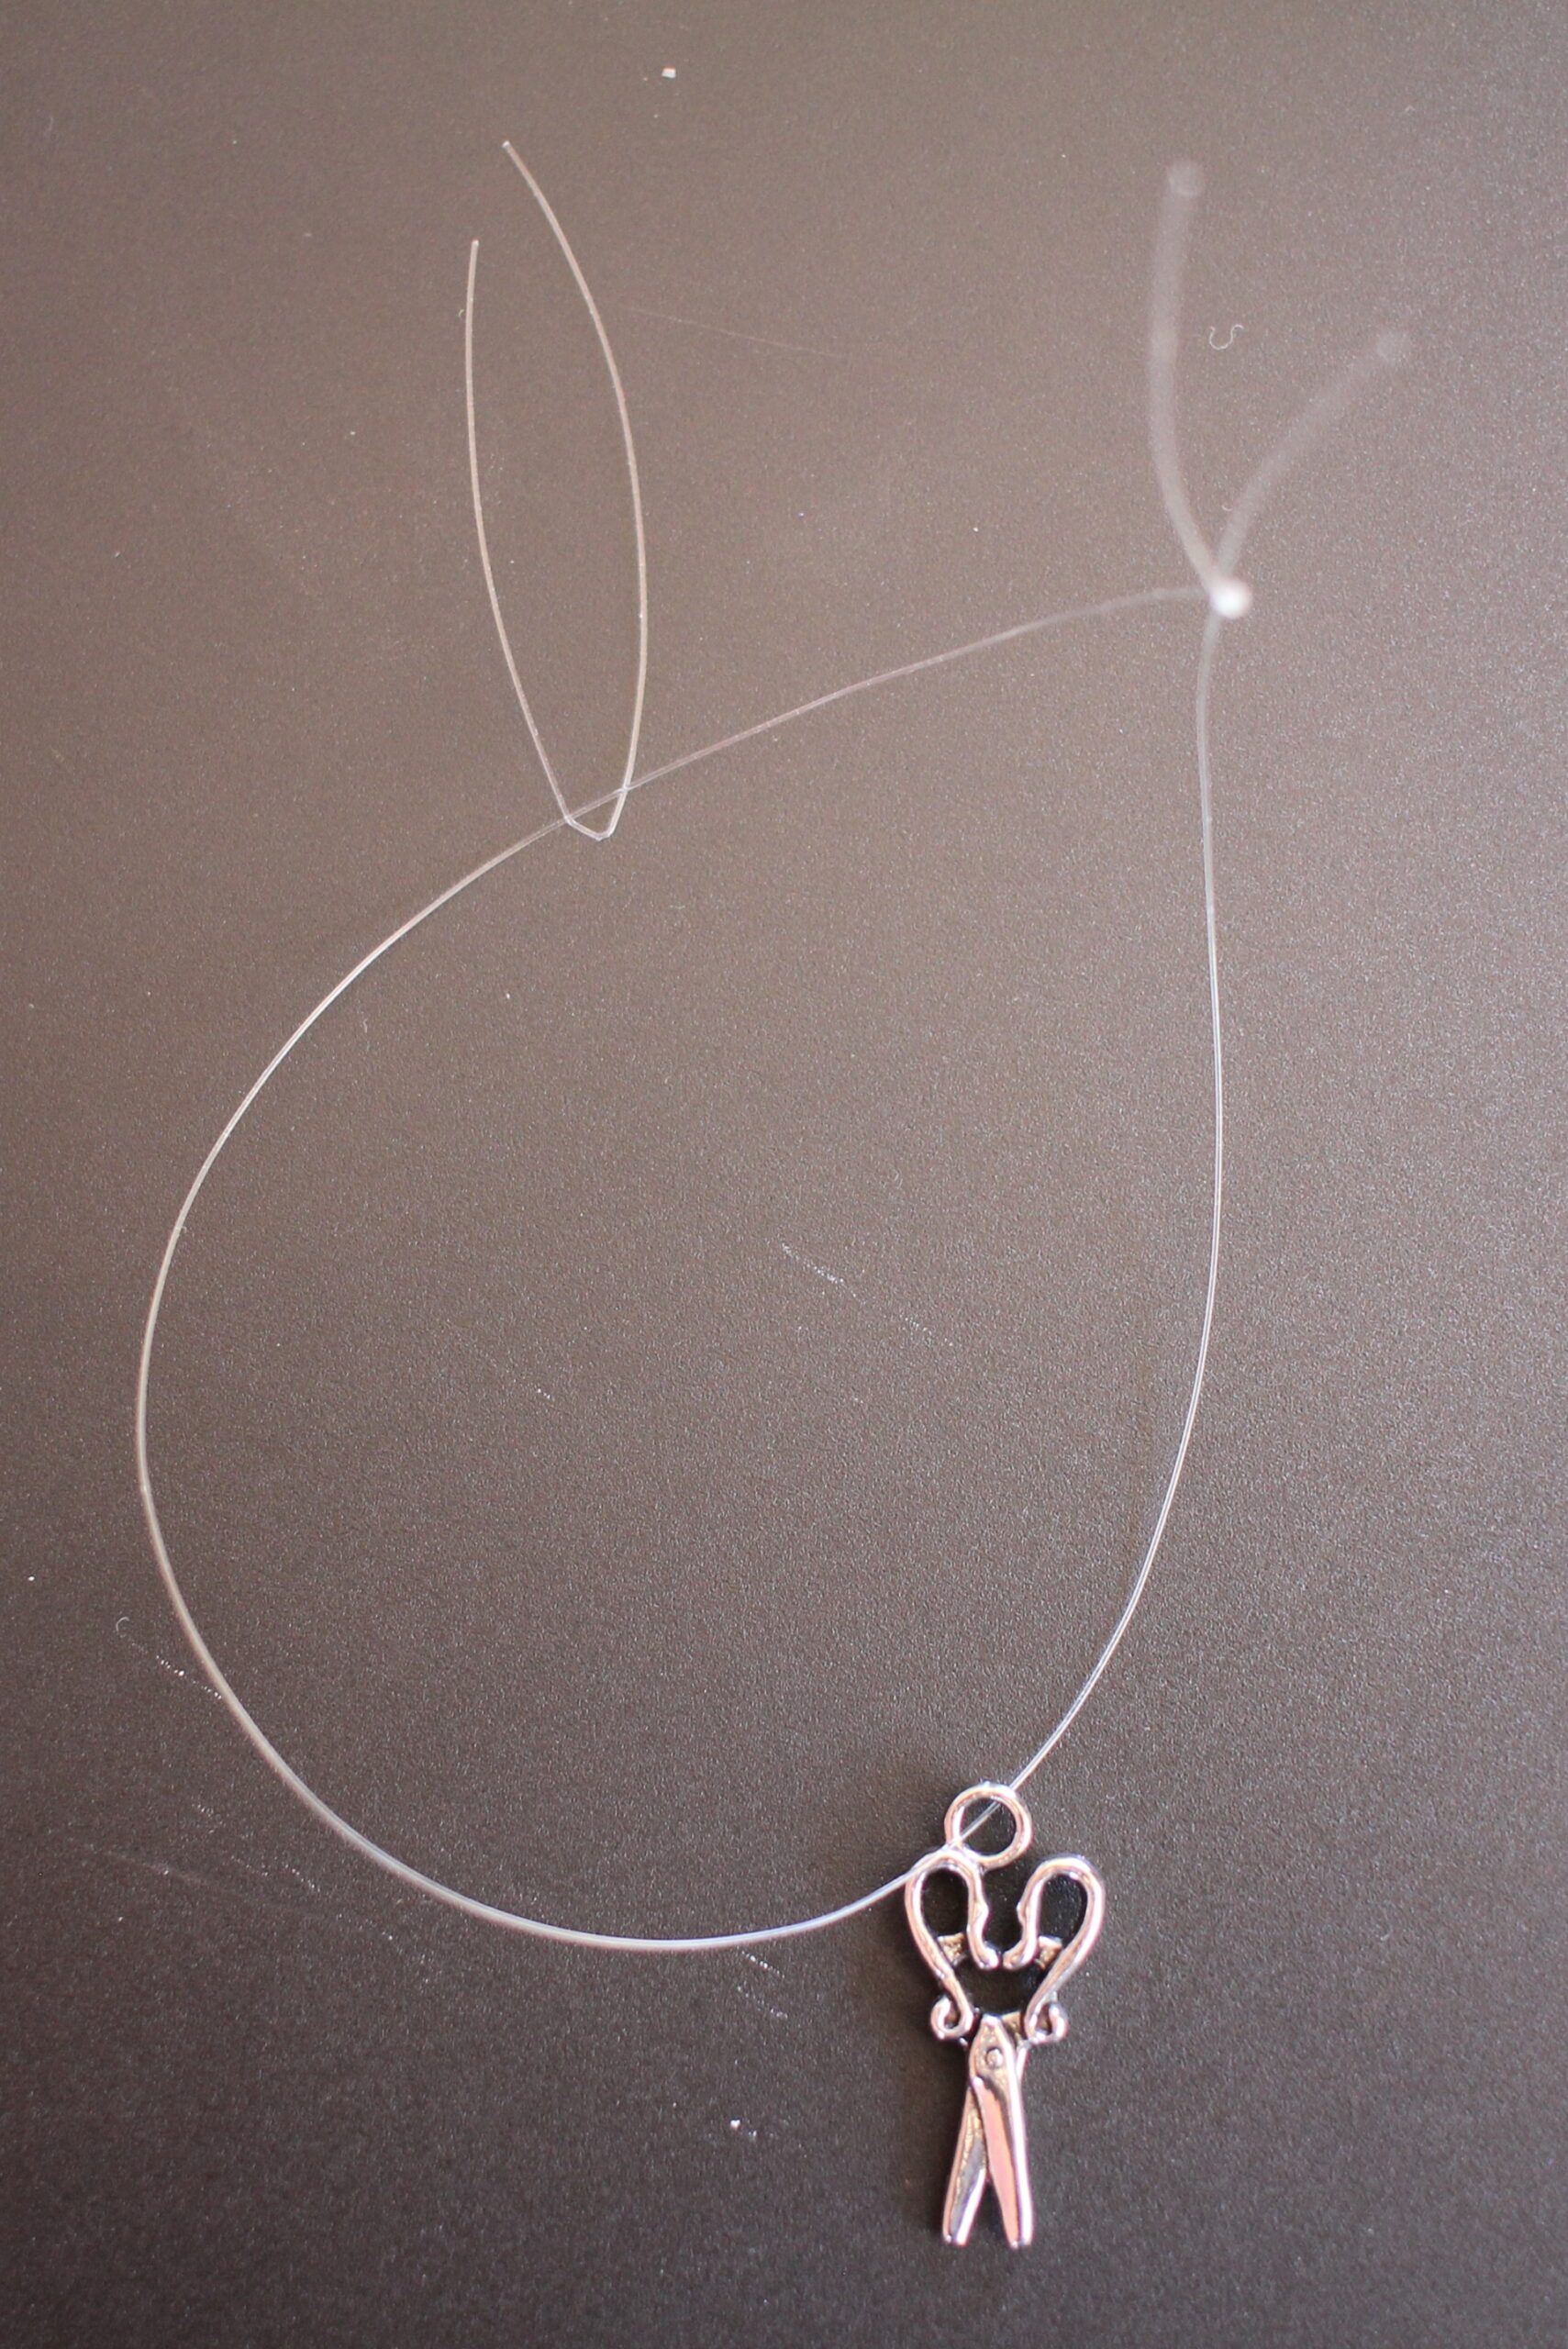 first-knot-with-needle